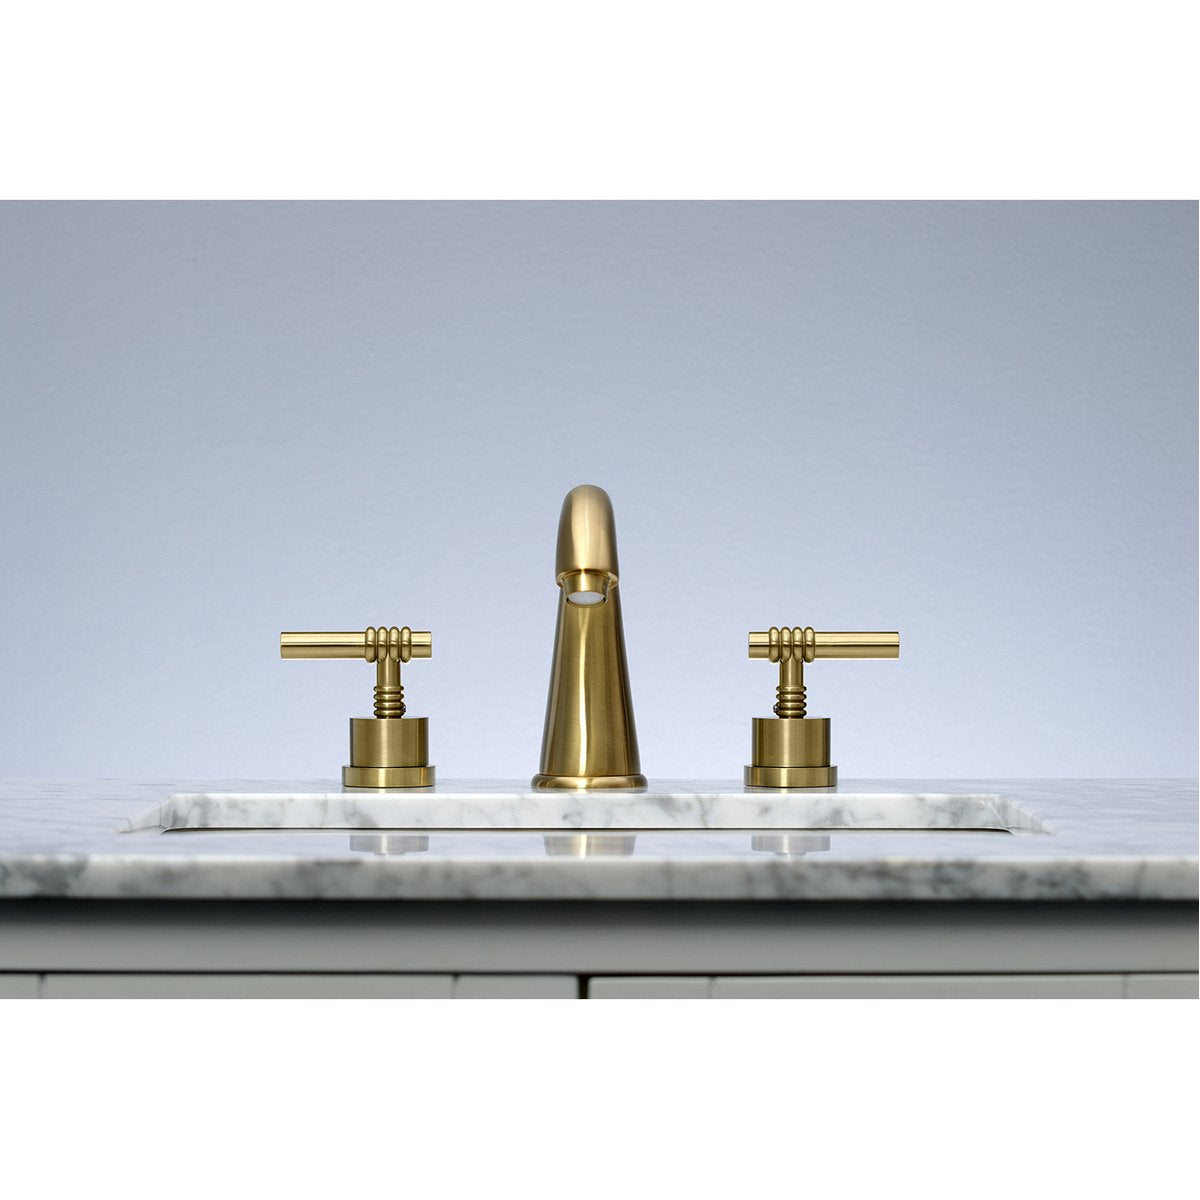 Kingston Brass 8-Inch Widespread Bathroom Faucet with Brass Pop-Up